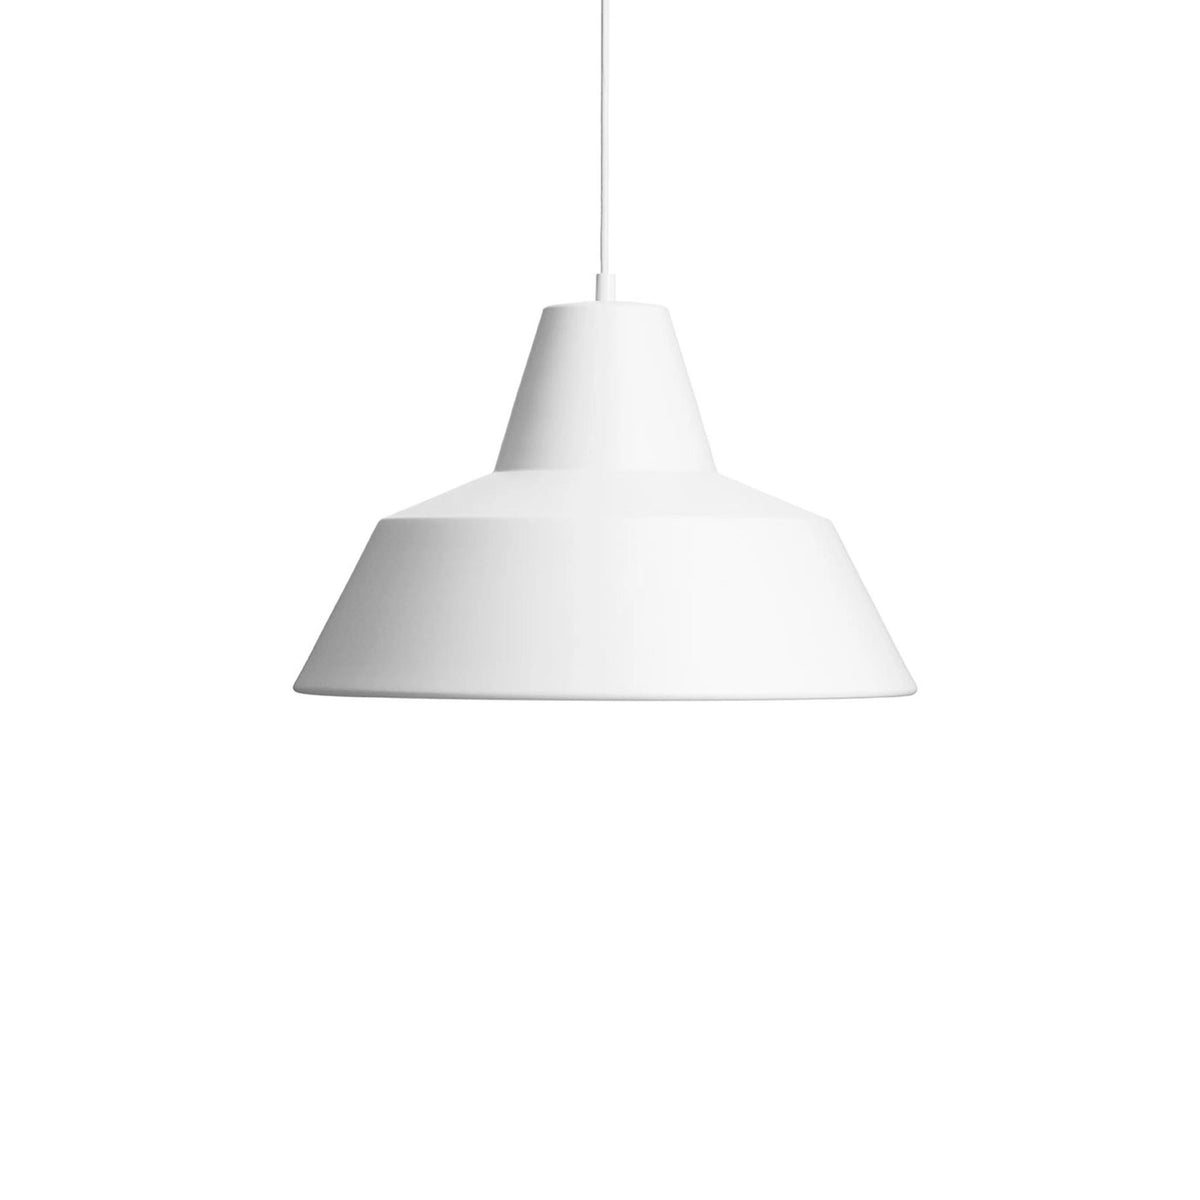 Made by Hand Workshop W4 Pendant in Matte White by A Wedel Madsen